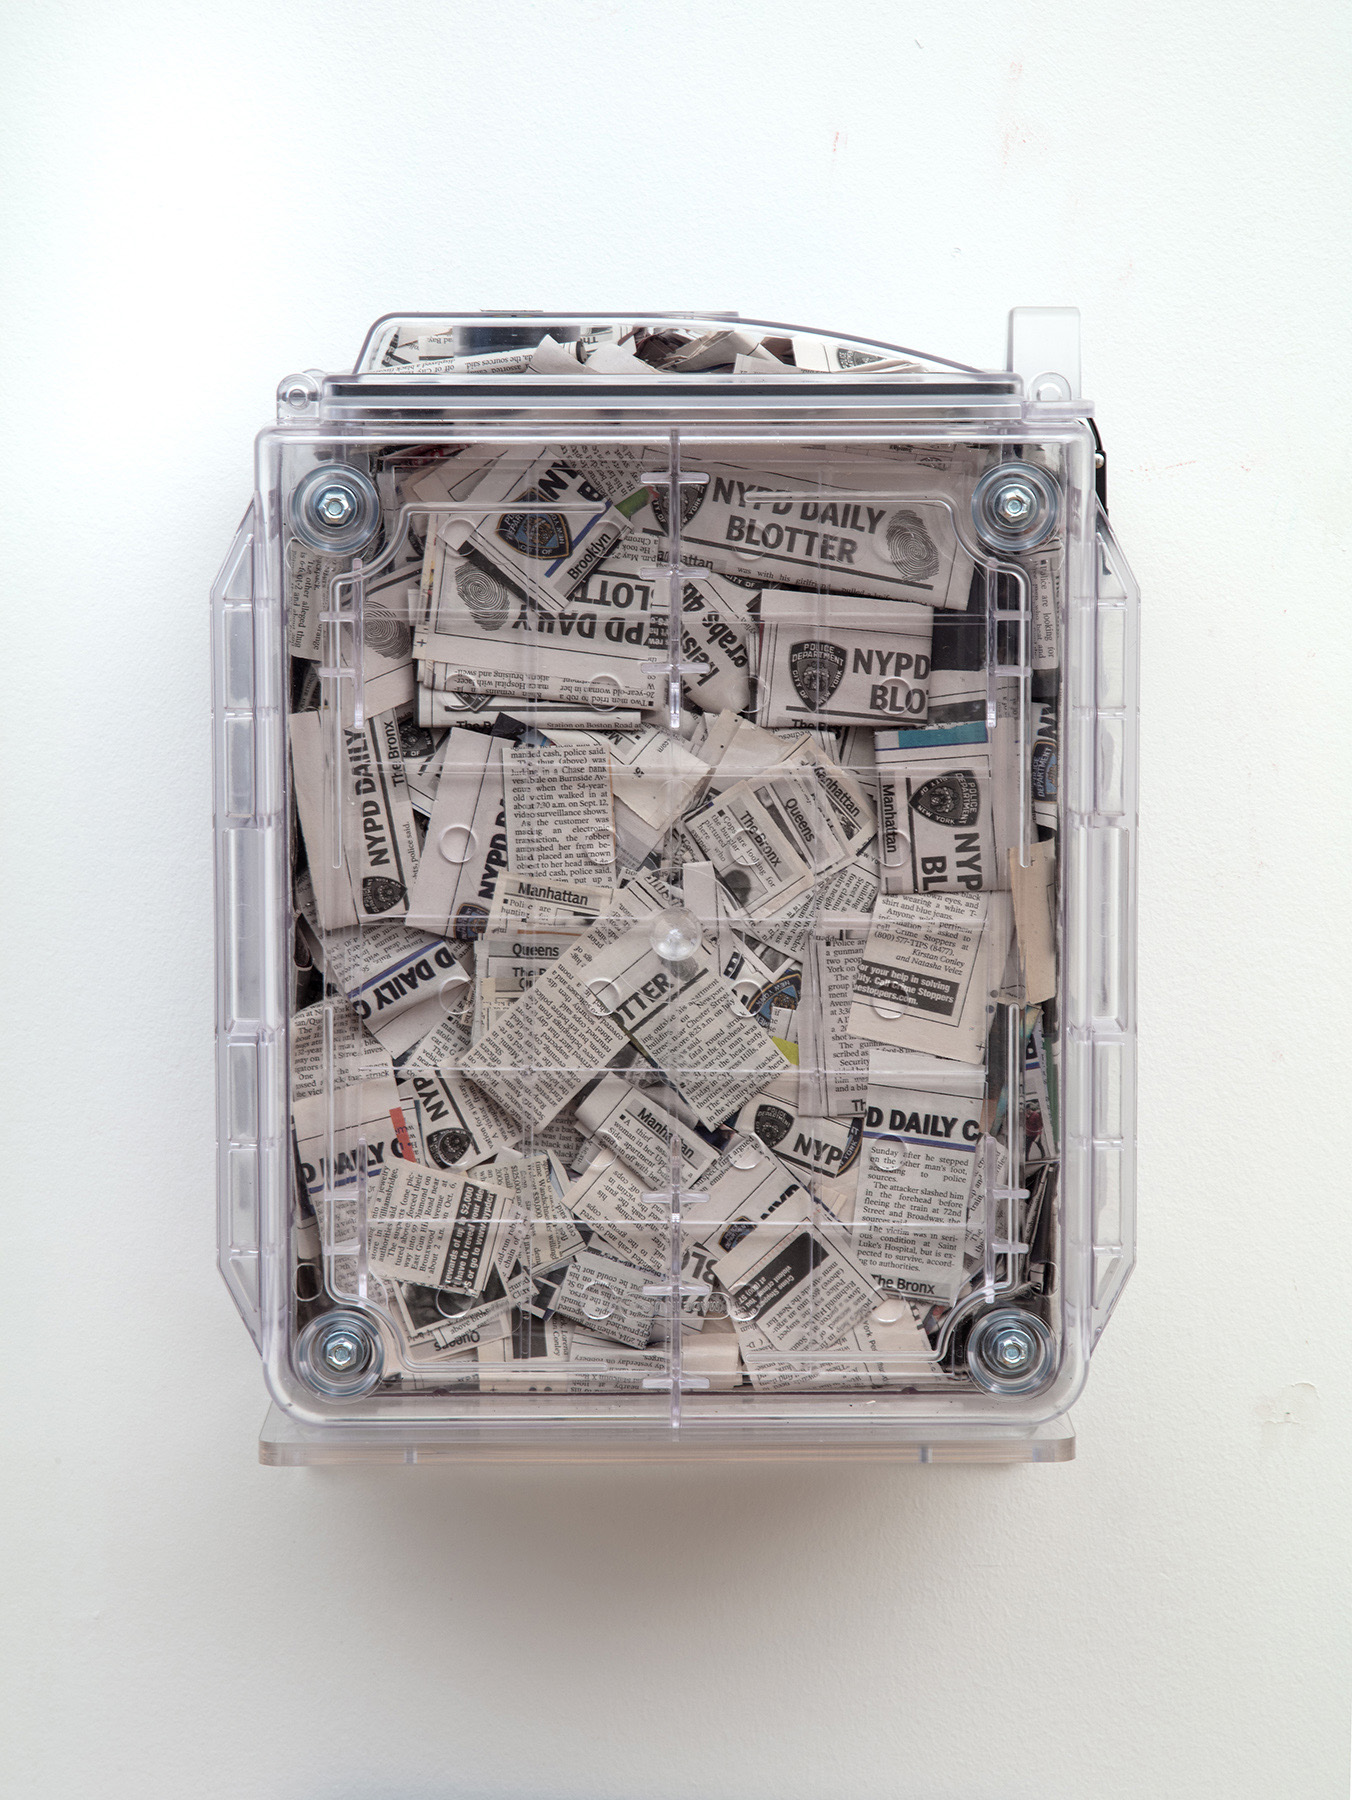 Blotter is another airtight desiccator box filled with an archive of the NYPD daily blotter clipping which ended its daily run in the printed paper in 2017.